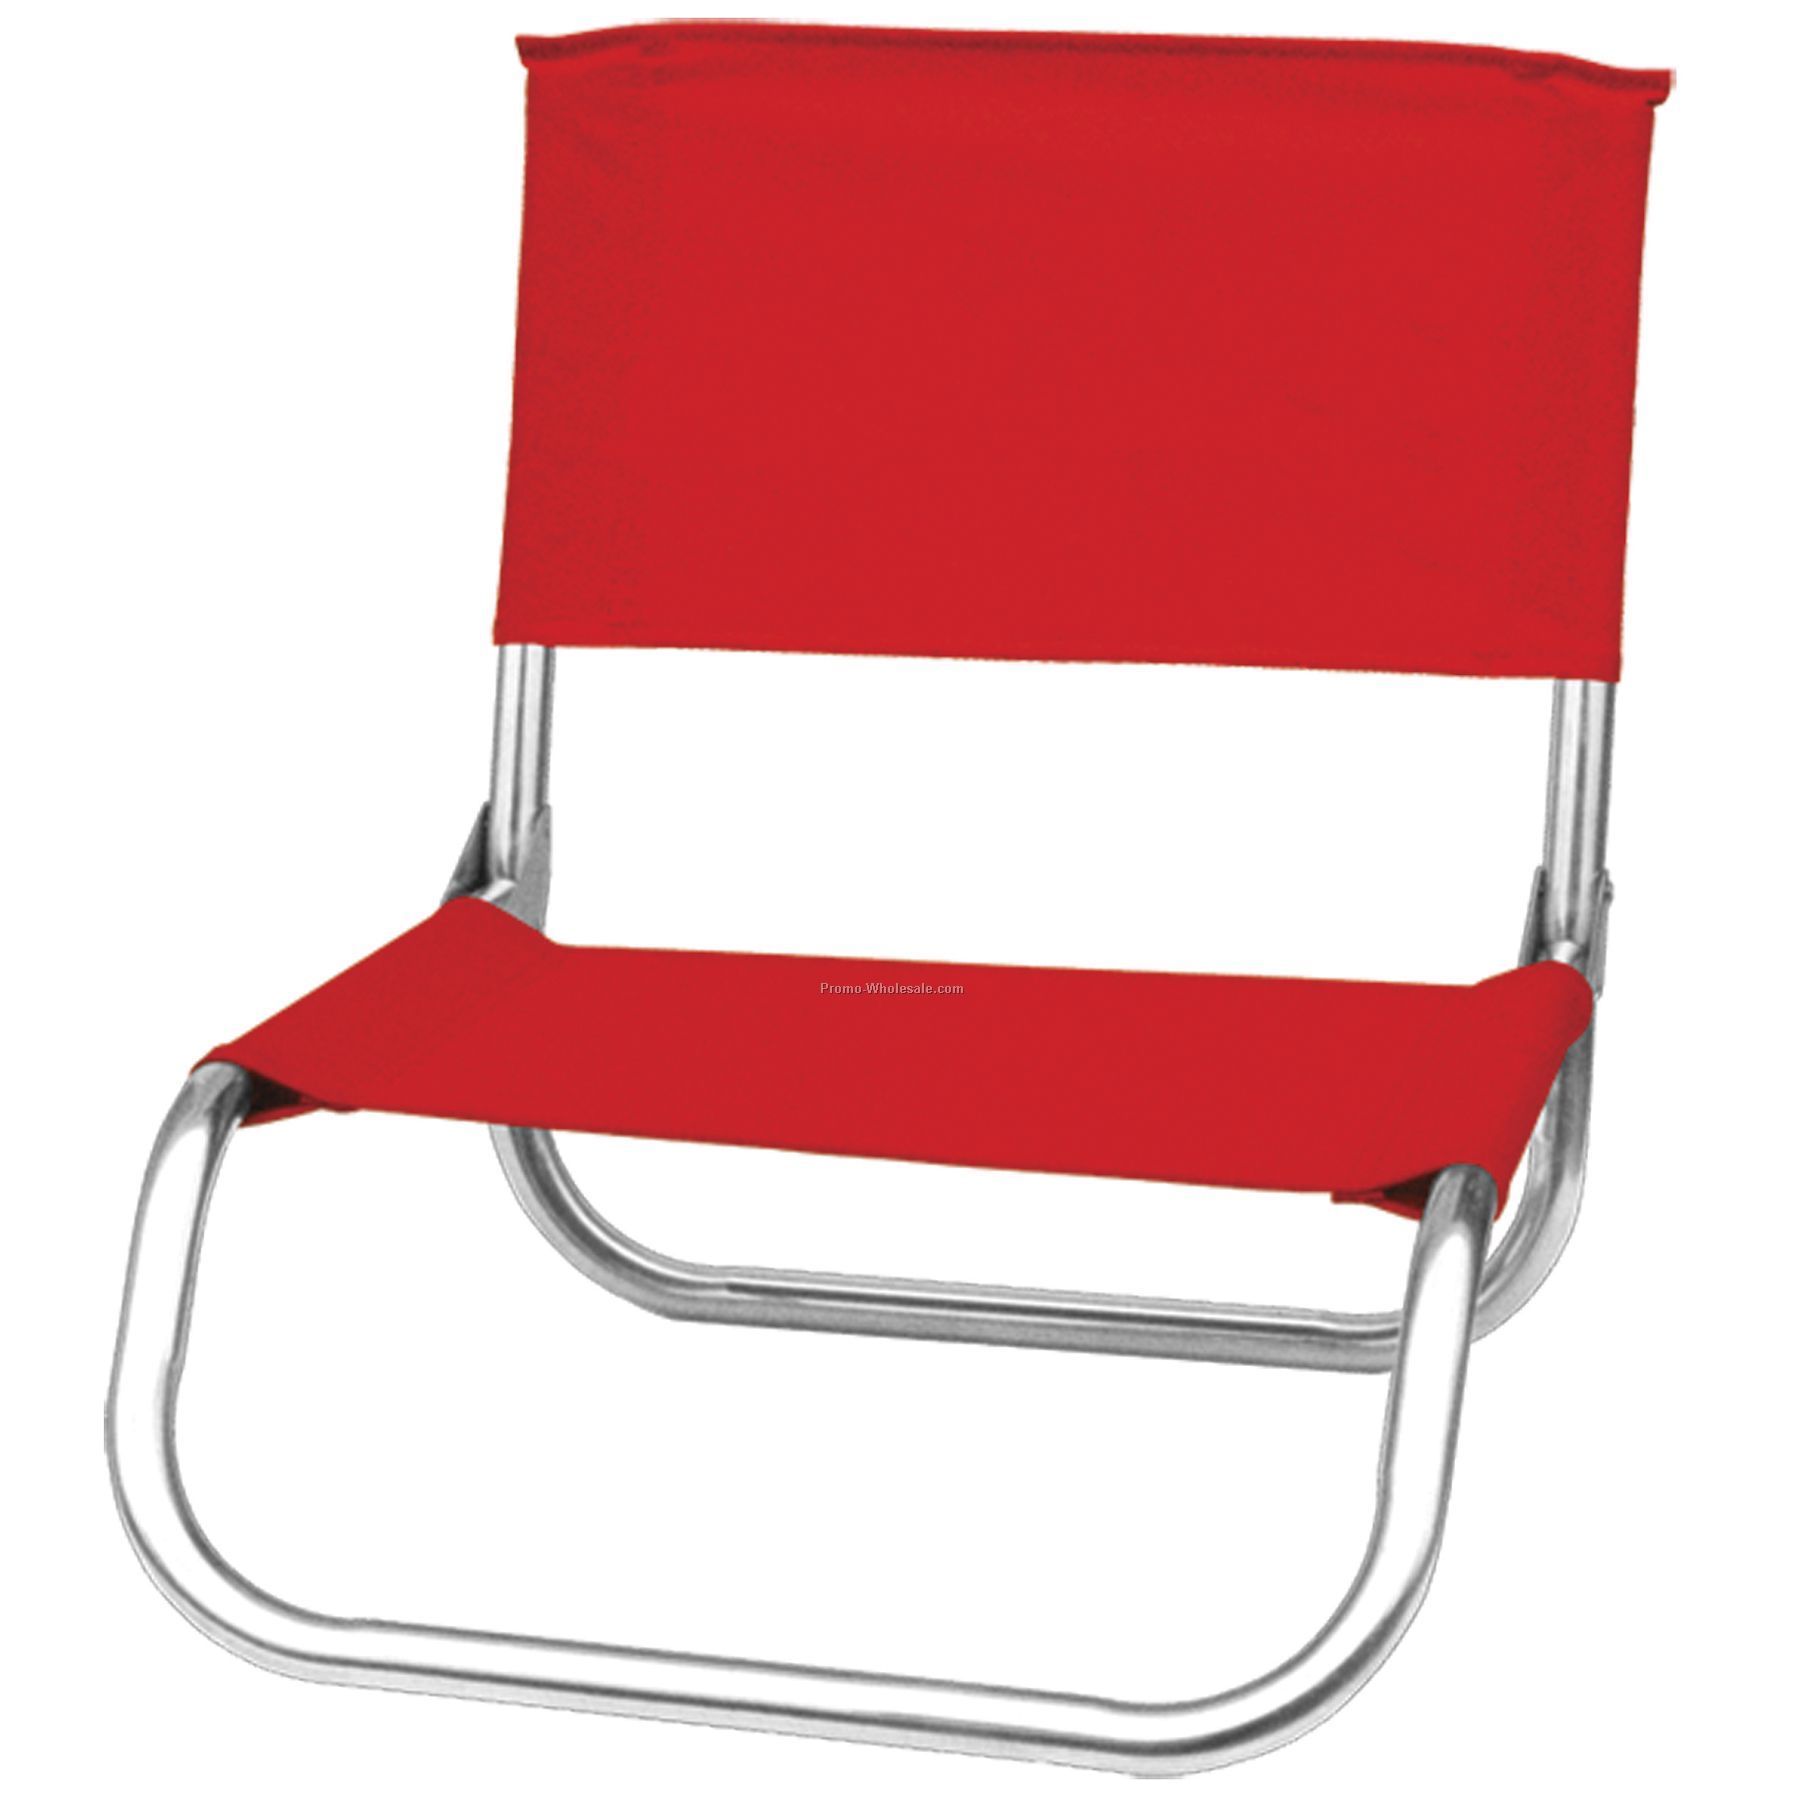 Promotional Beach Chair W/ 7/8" Frame (Full Color Digital Or 1 Color)